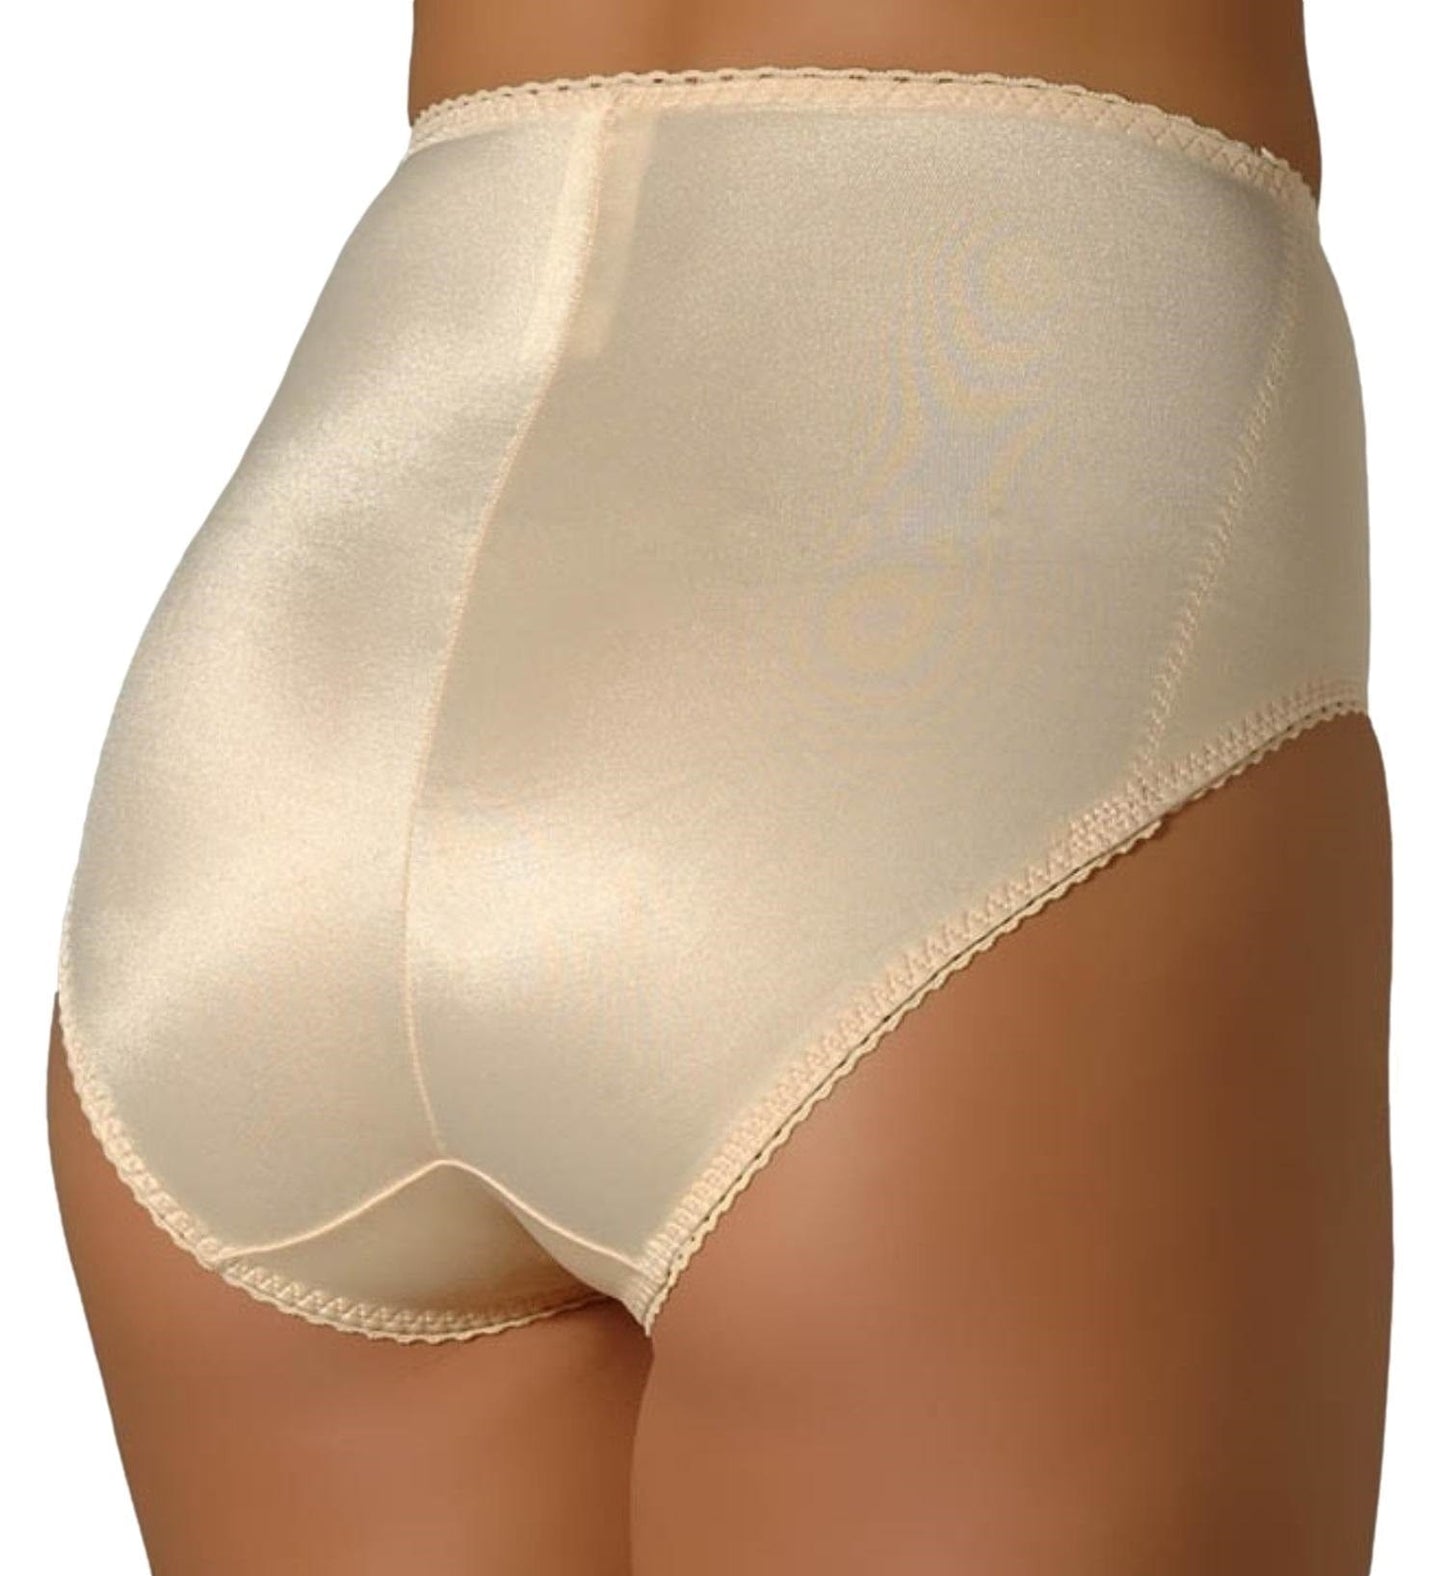 Style 510 | High Leg Front Panty Brief Light Shaping